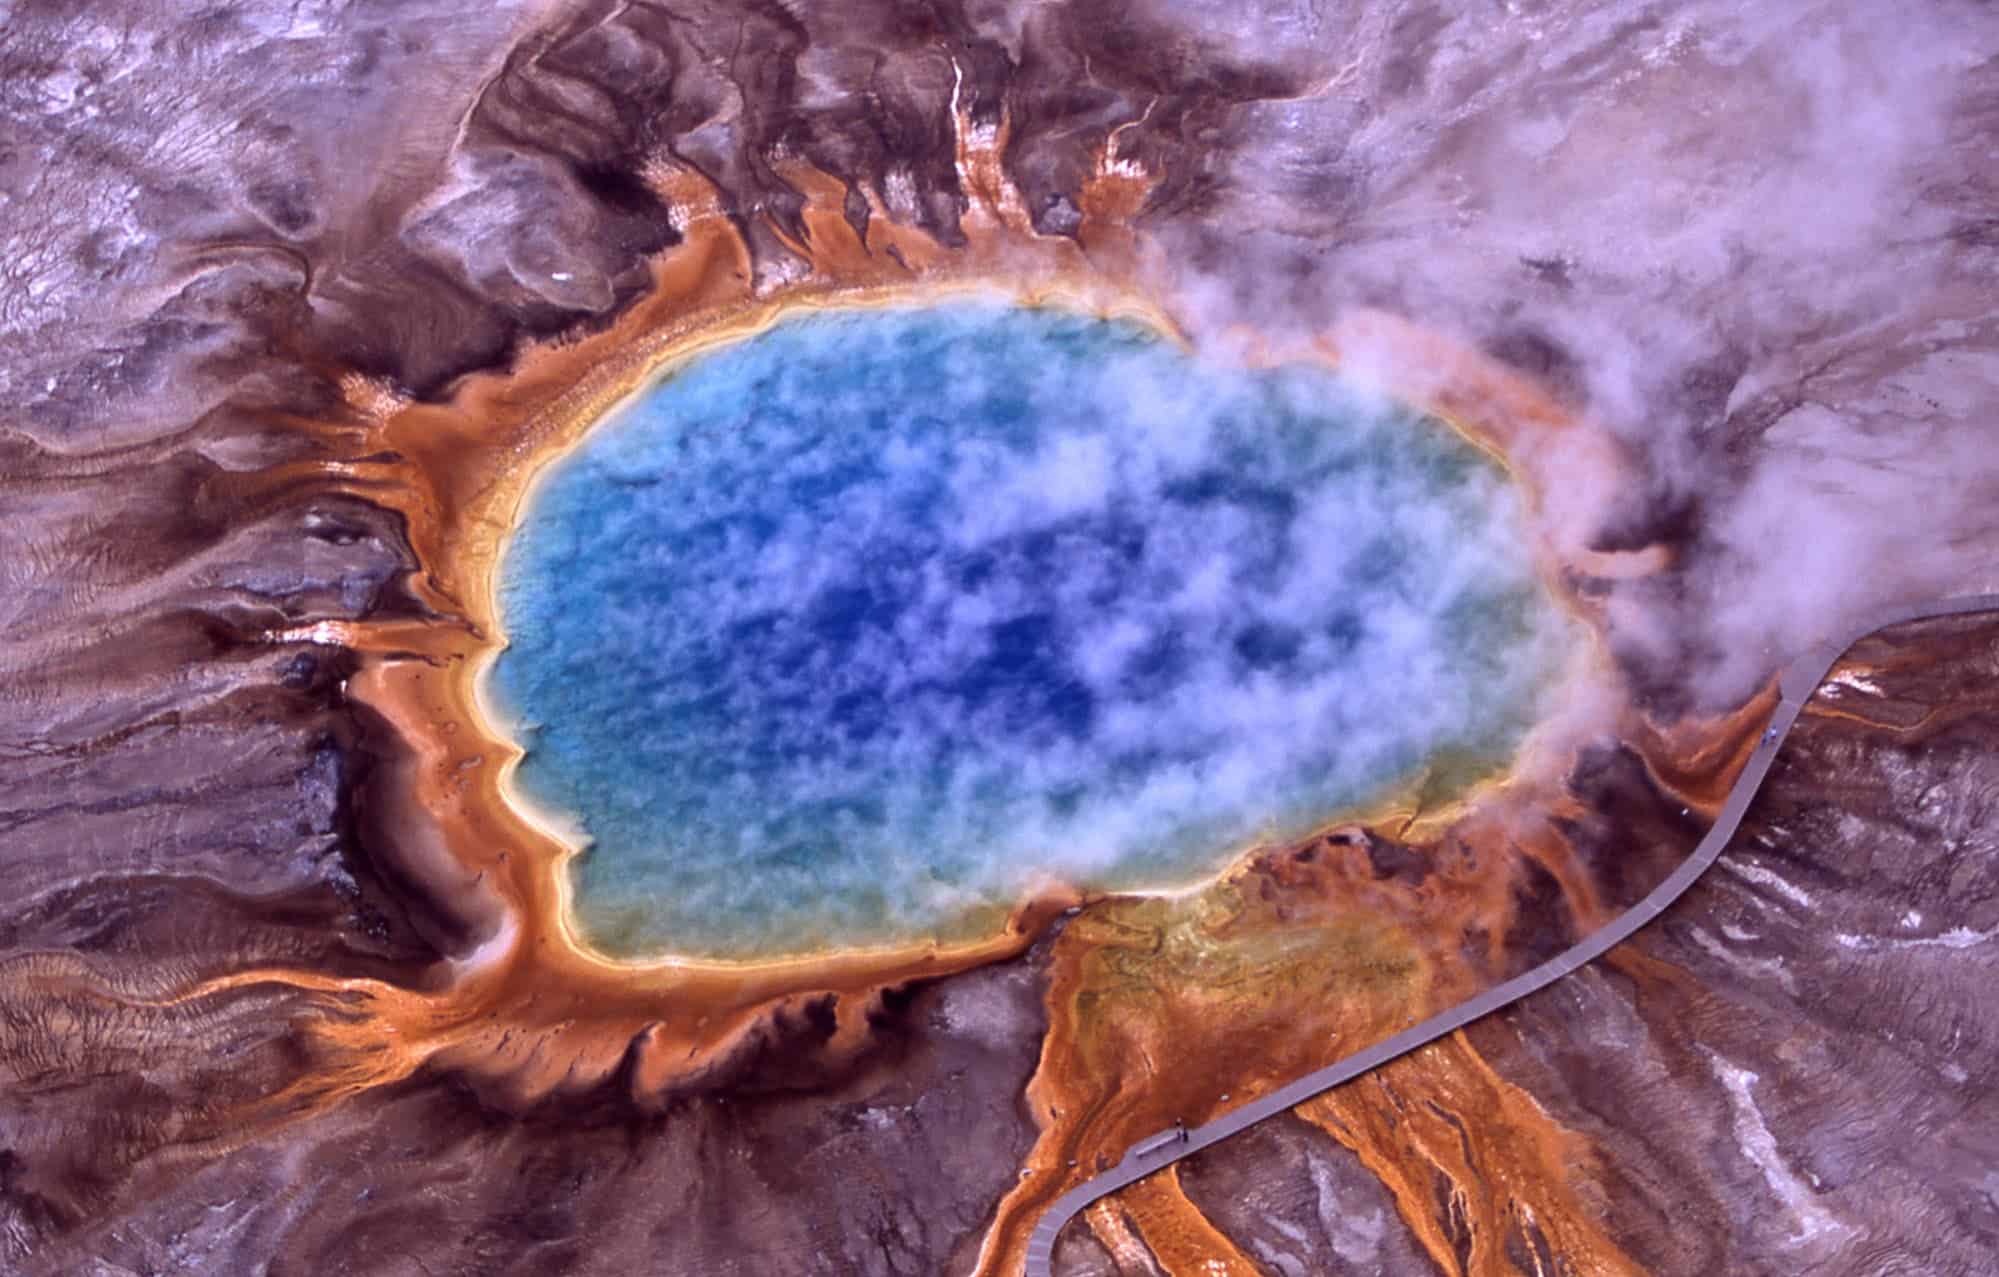 Archaeobacteria, one of the primary lineages of life on Earth, were first found in extreme environments, such as the Grand Prismatic Spring in Yellowstone depicted here. Image credits: Jim Peaco, NPS.